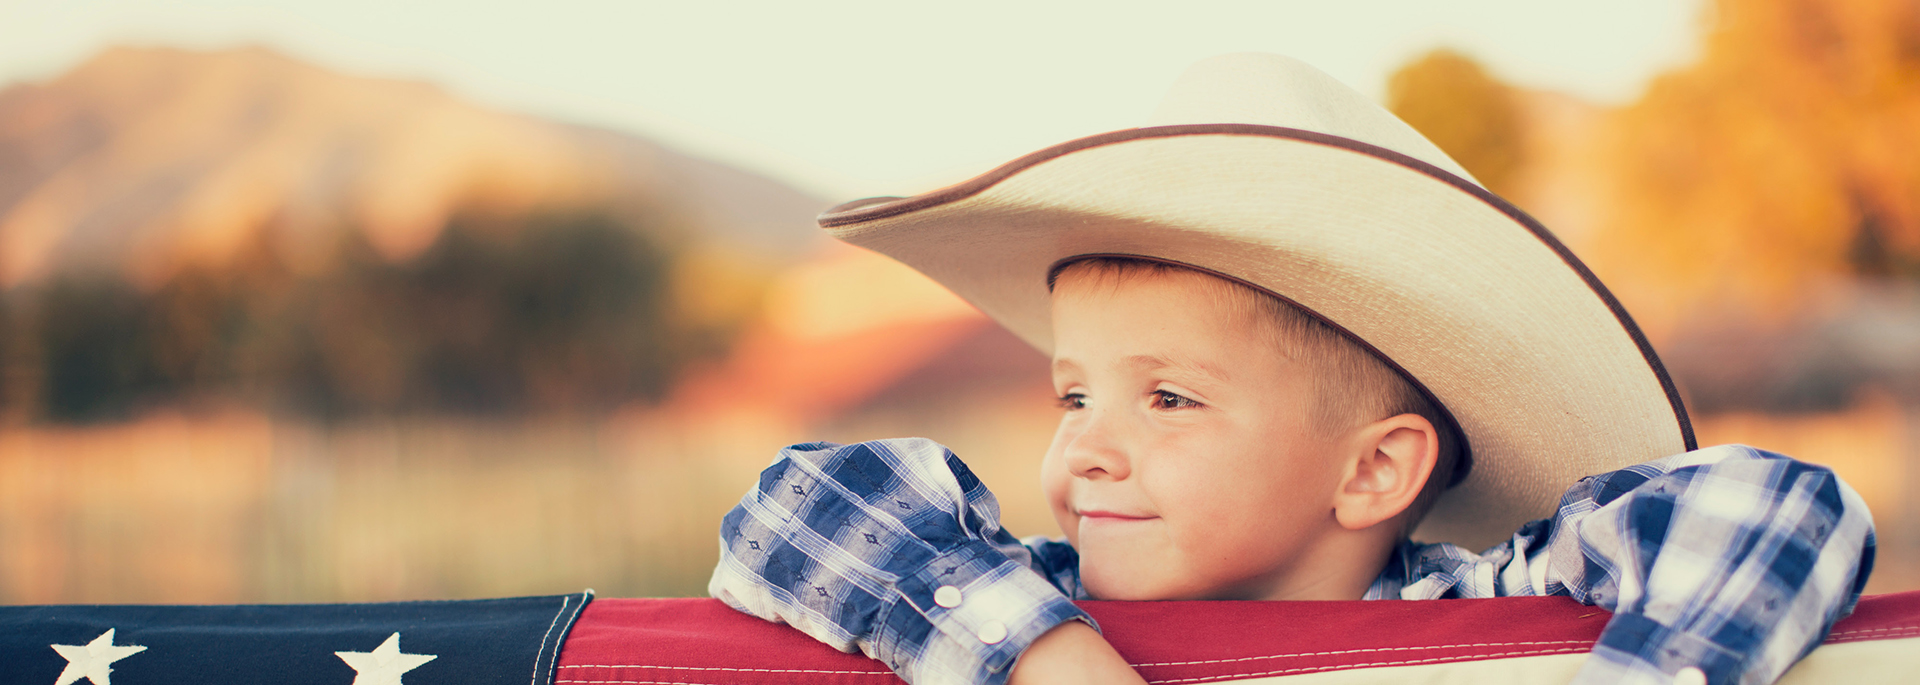 child wearing cowboy hat and turned to the side smiling